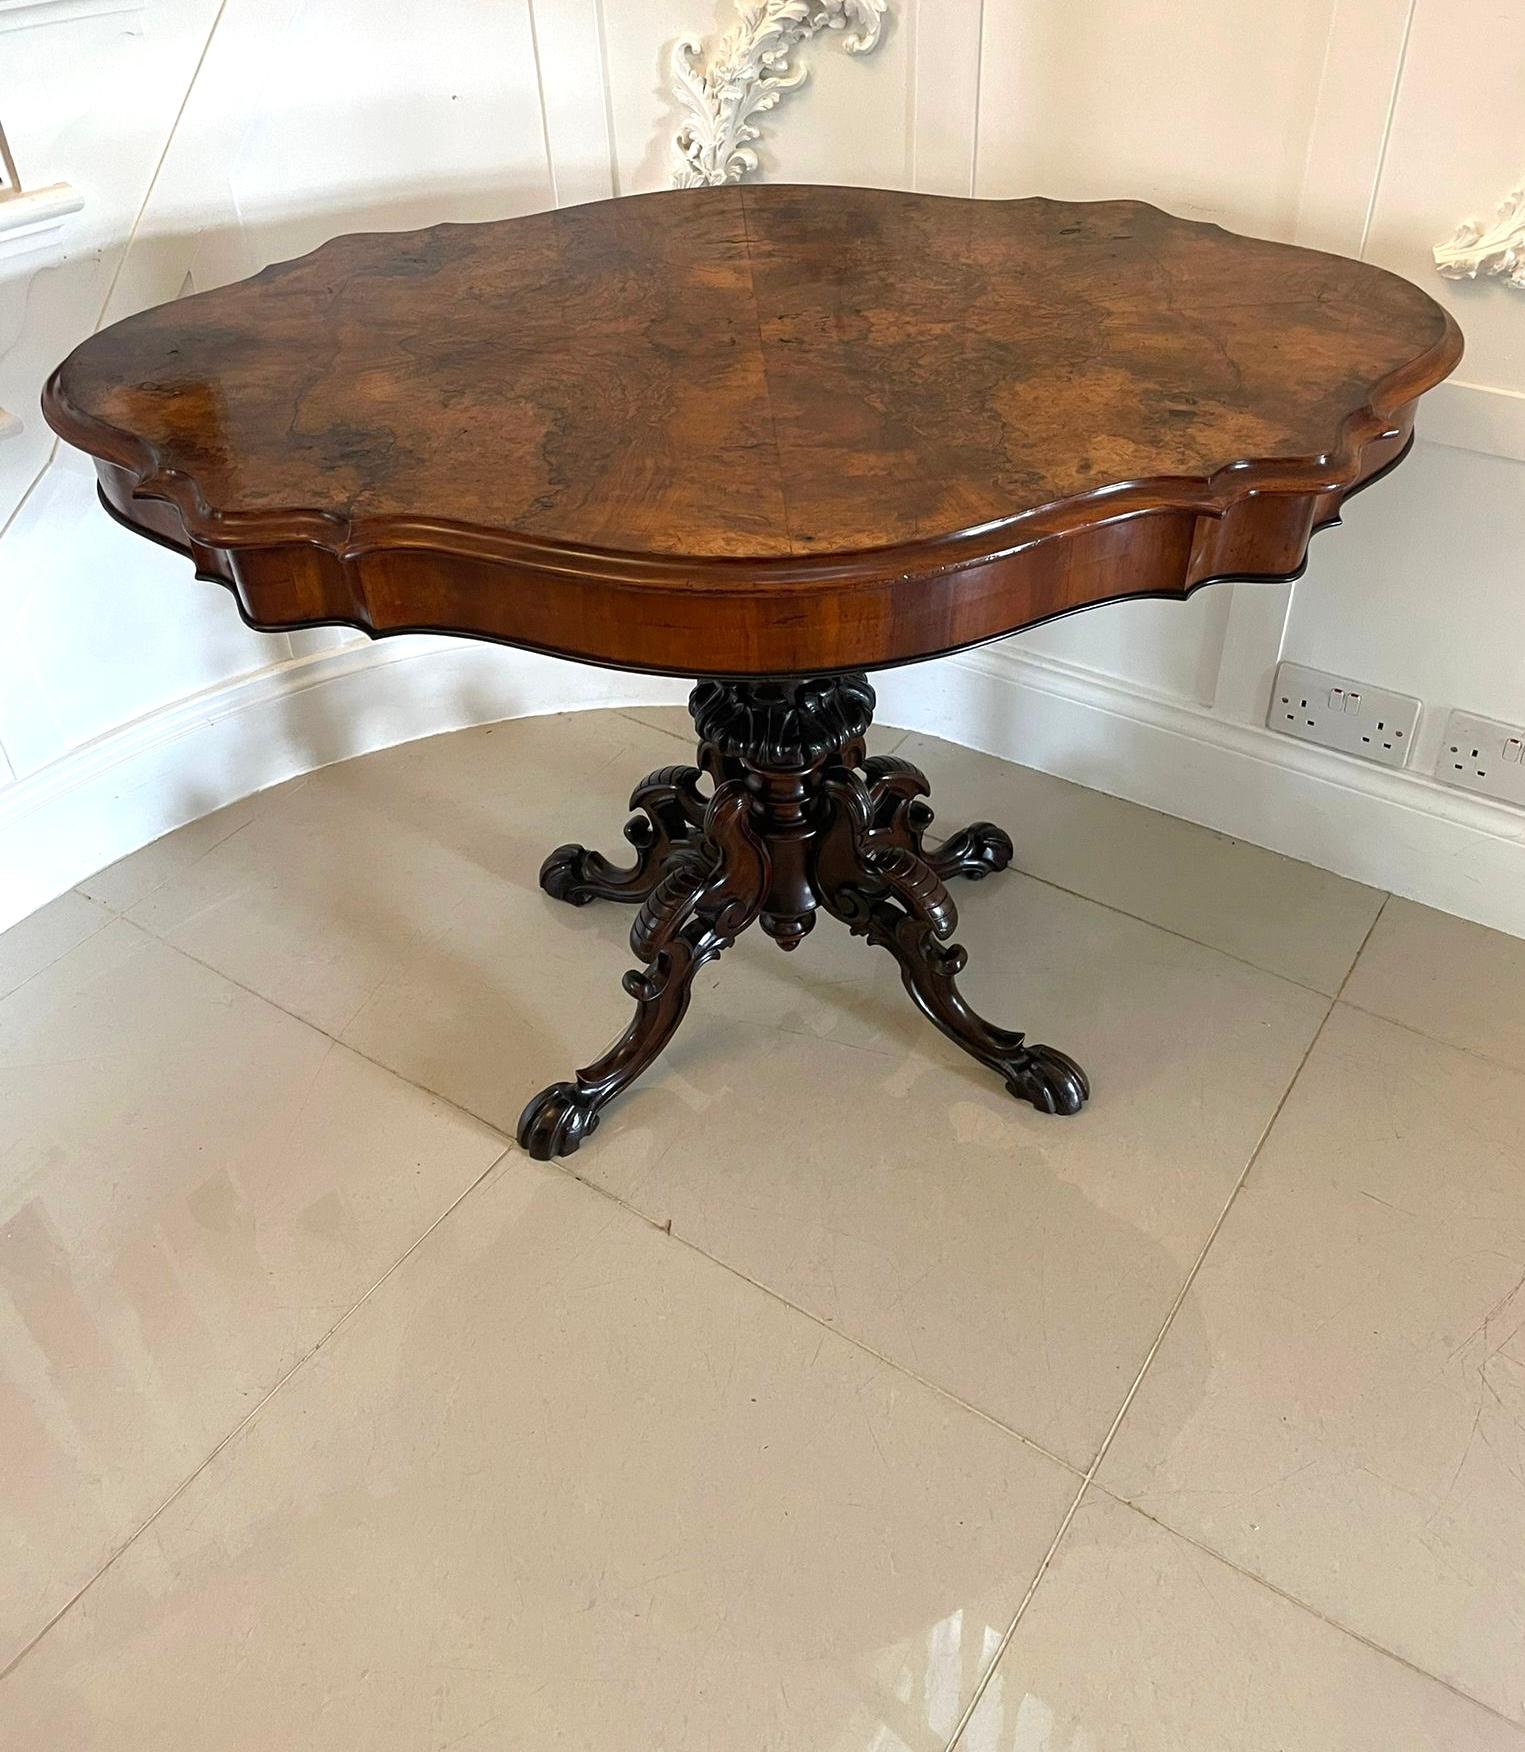 Antique Victorian quality burr walnut centre table having a quality burr walnut serpentine shaped top with a thumb moulded edge, serpentine shaped frieze supported on a turned carved solid walnut pedestal column standing on four shaped carved